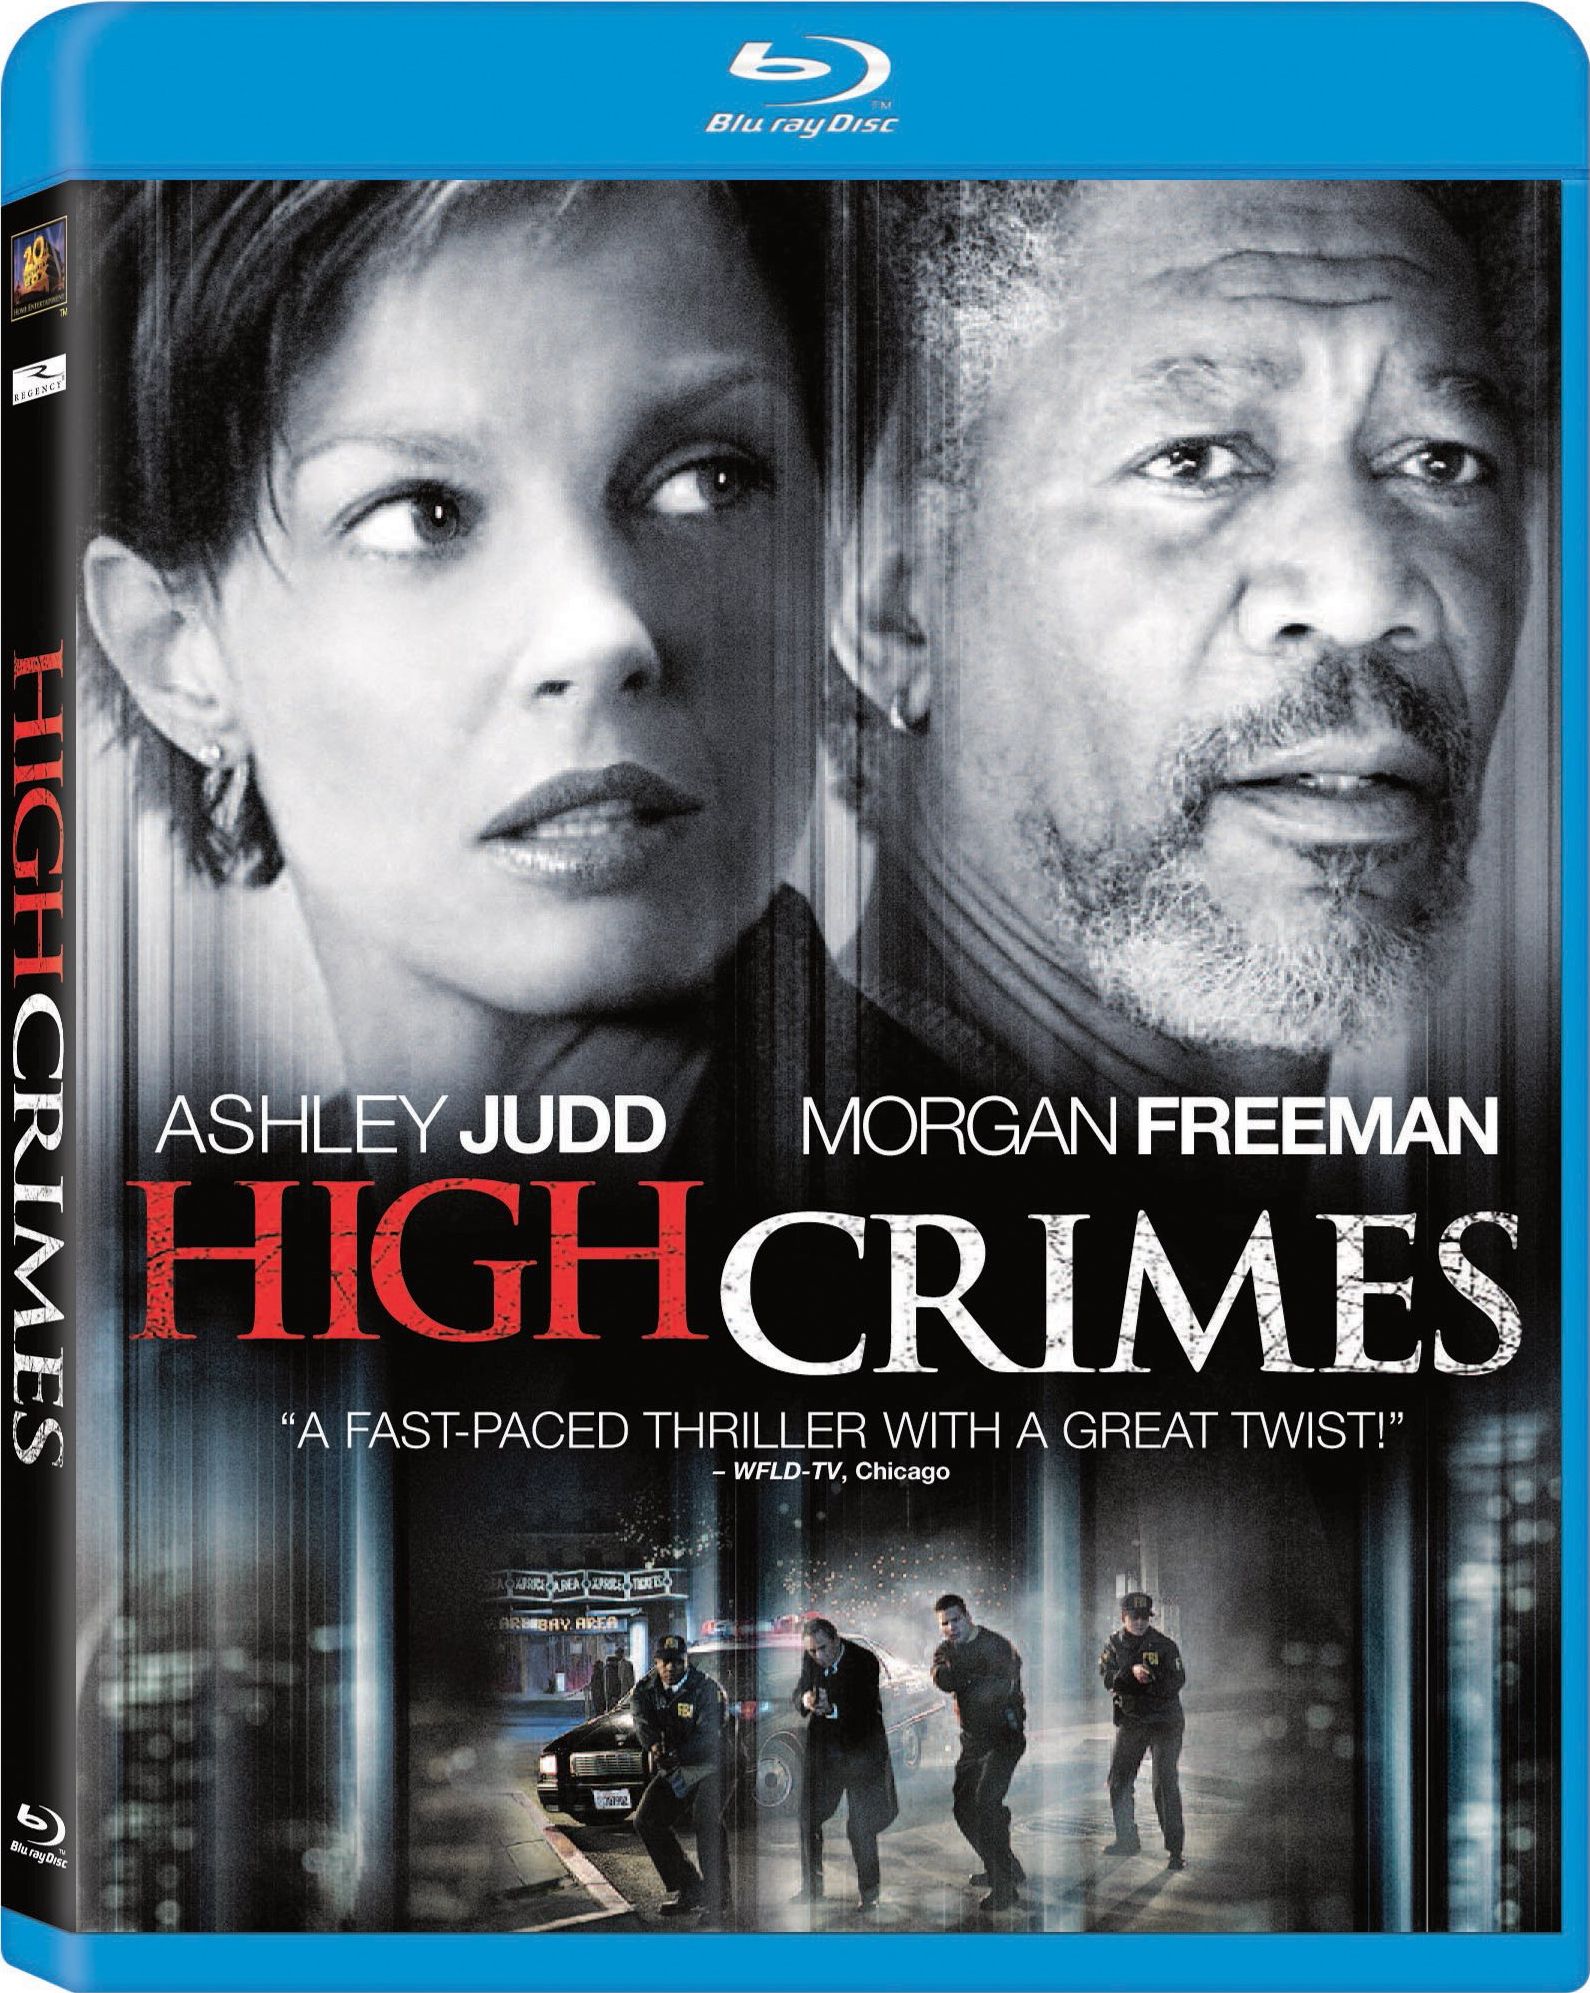 High Crimes DVD Release Date August 27, 2002